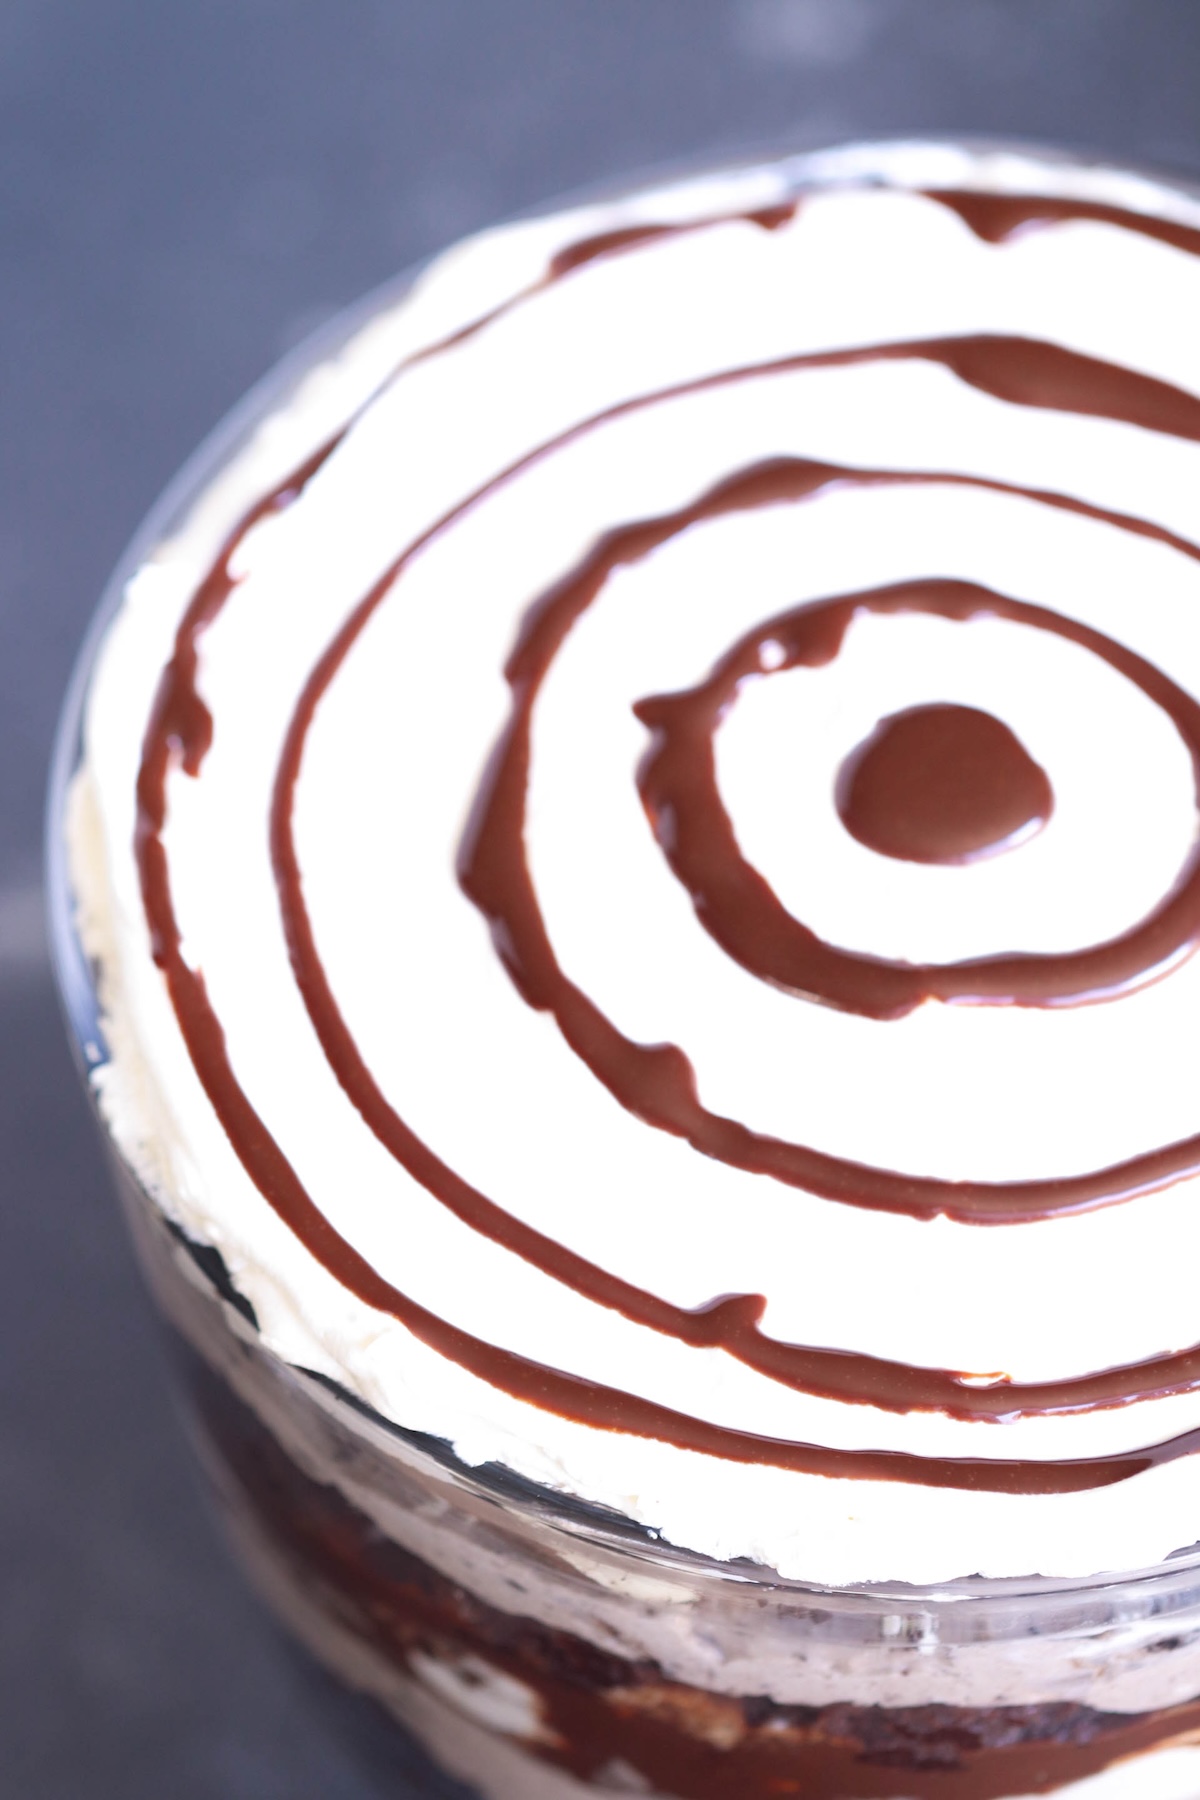 A layered dessert with chocolate and cream topped with concentric circles of chocolate drizzle.